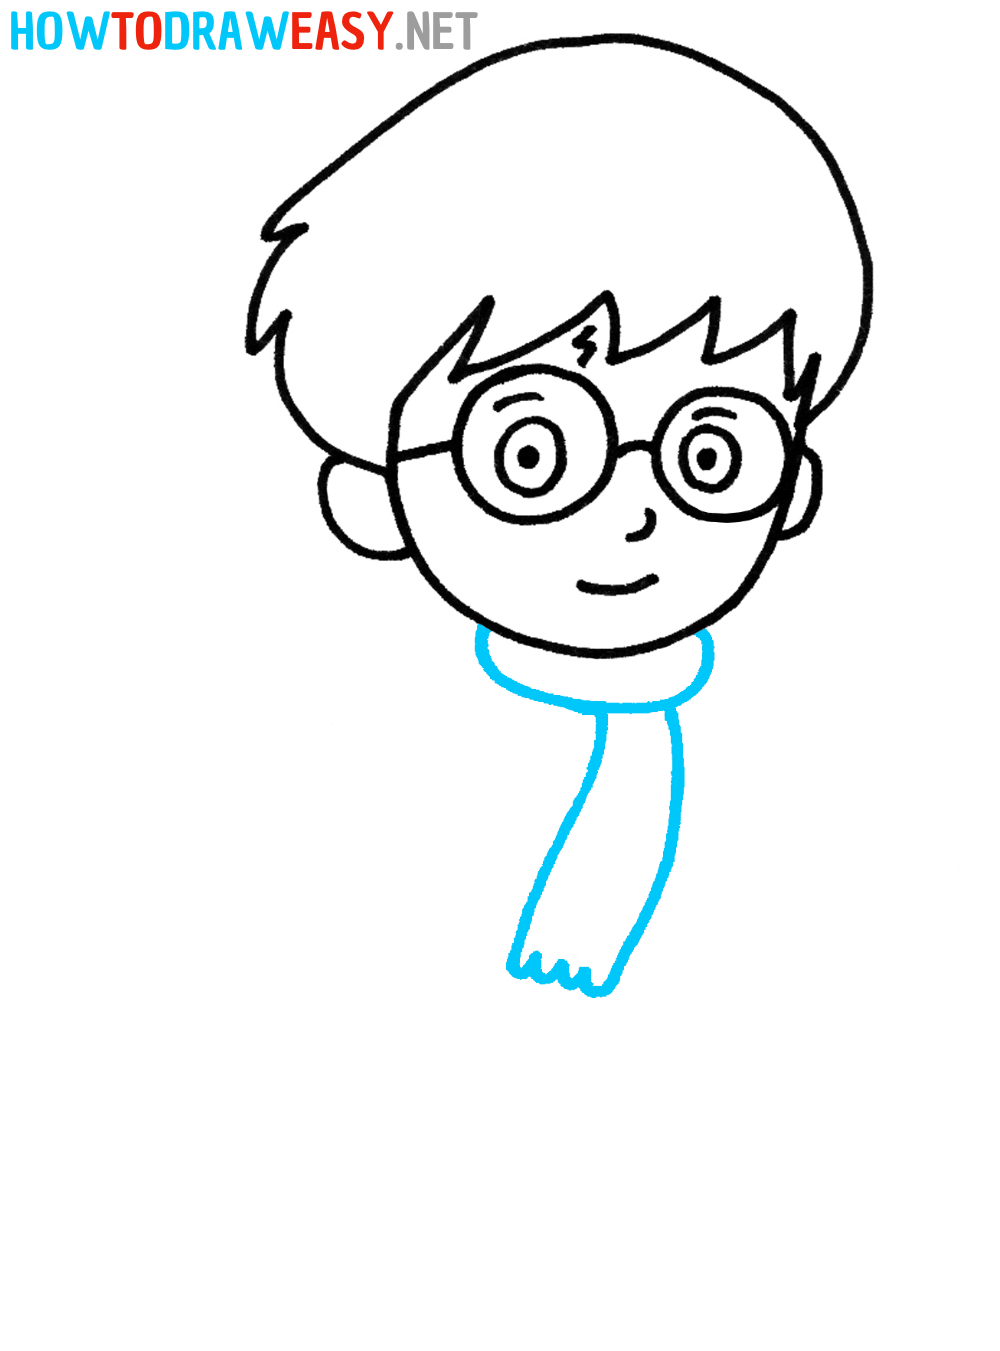 How to Draw Harry Potter Scarf